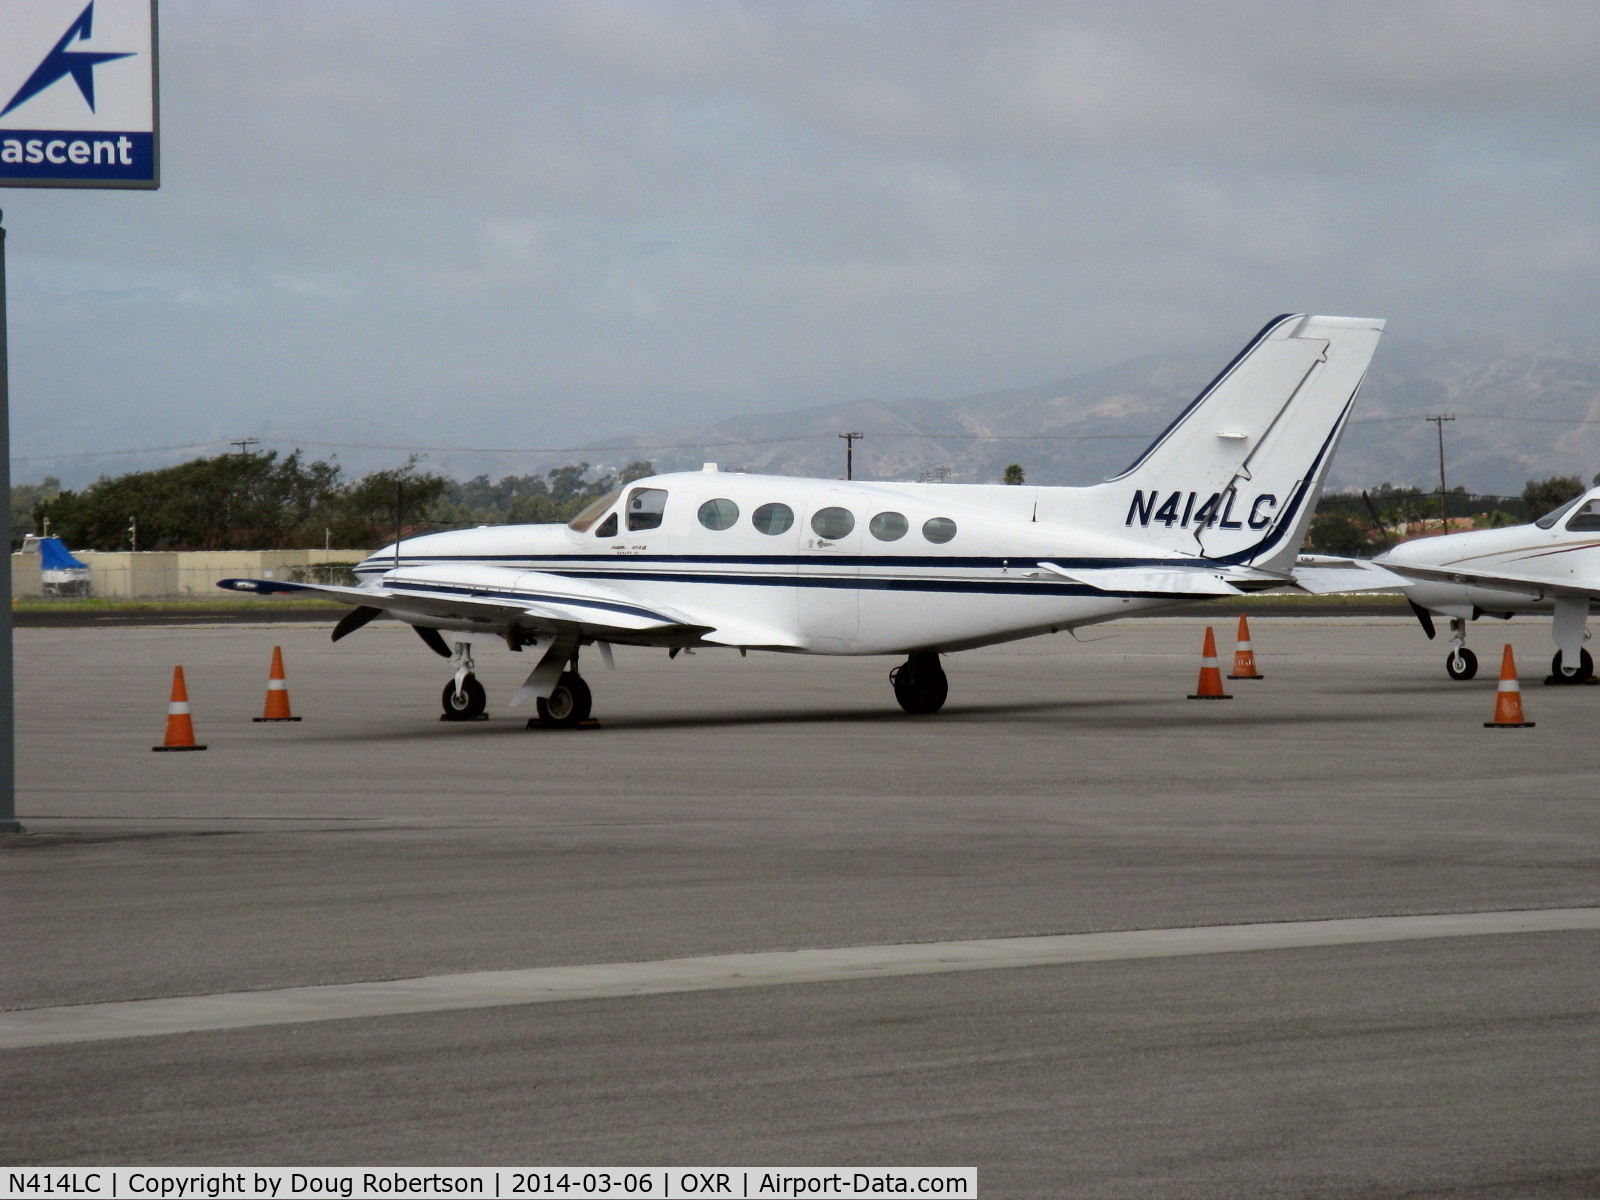 N414LC, 1978 Cessna 414A Chancellor C/N 414A0099, 1978 Cessna 414A CHANCELLOR, two Continental TSIO-520-NB turbocharged, 310 Hp each, bonded wet wings without tip tanks